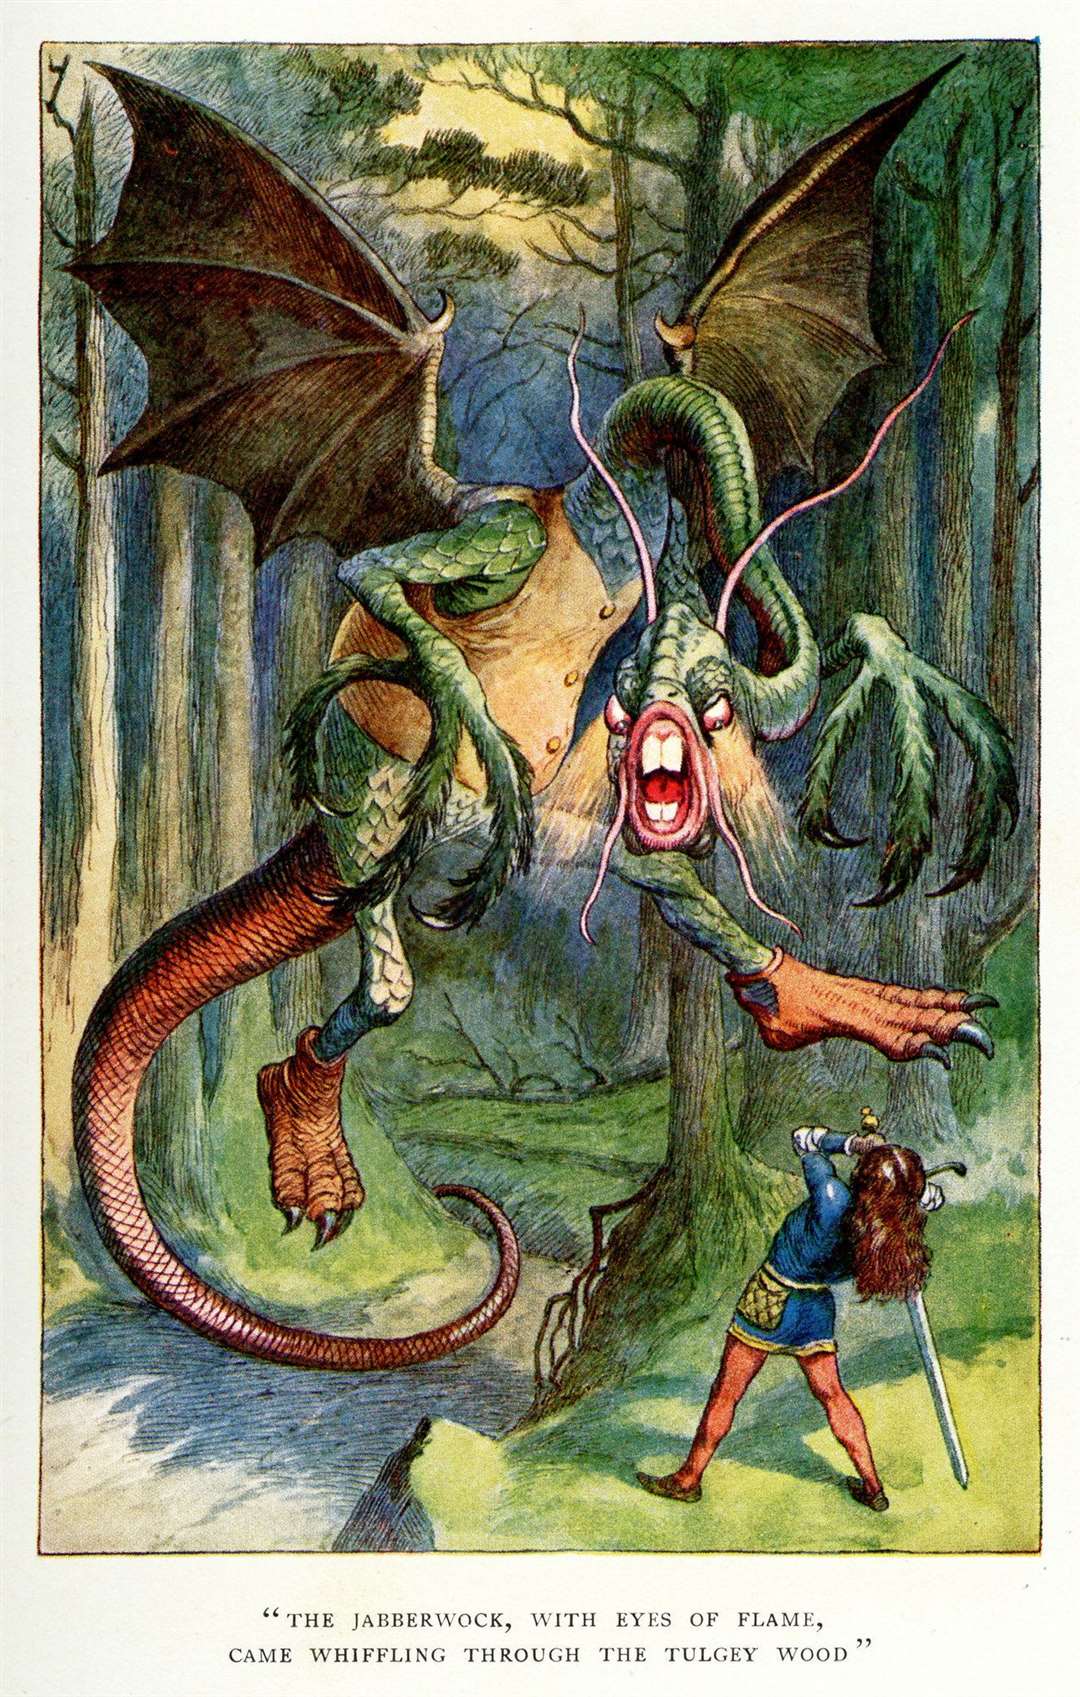 The Jabberwock featured in Lewis Carroll's nonsense rhyme Jabberwocky in Alice Through The Looking Glass